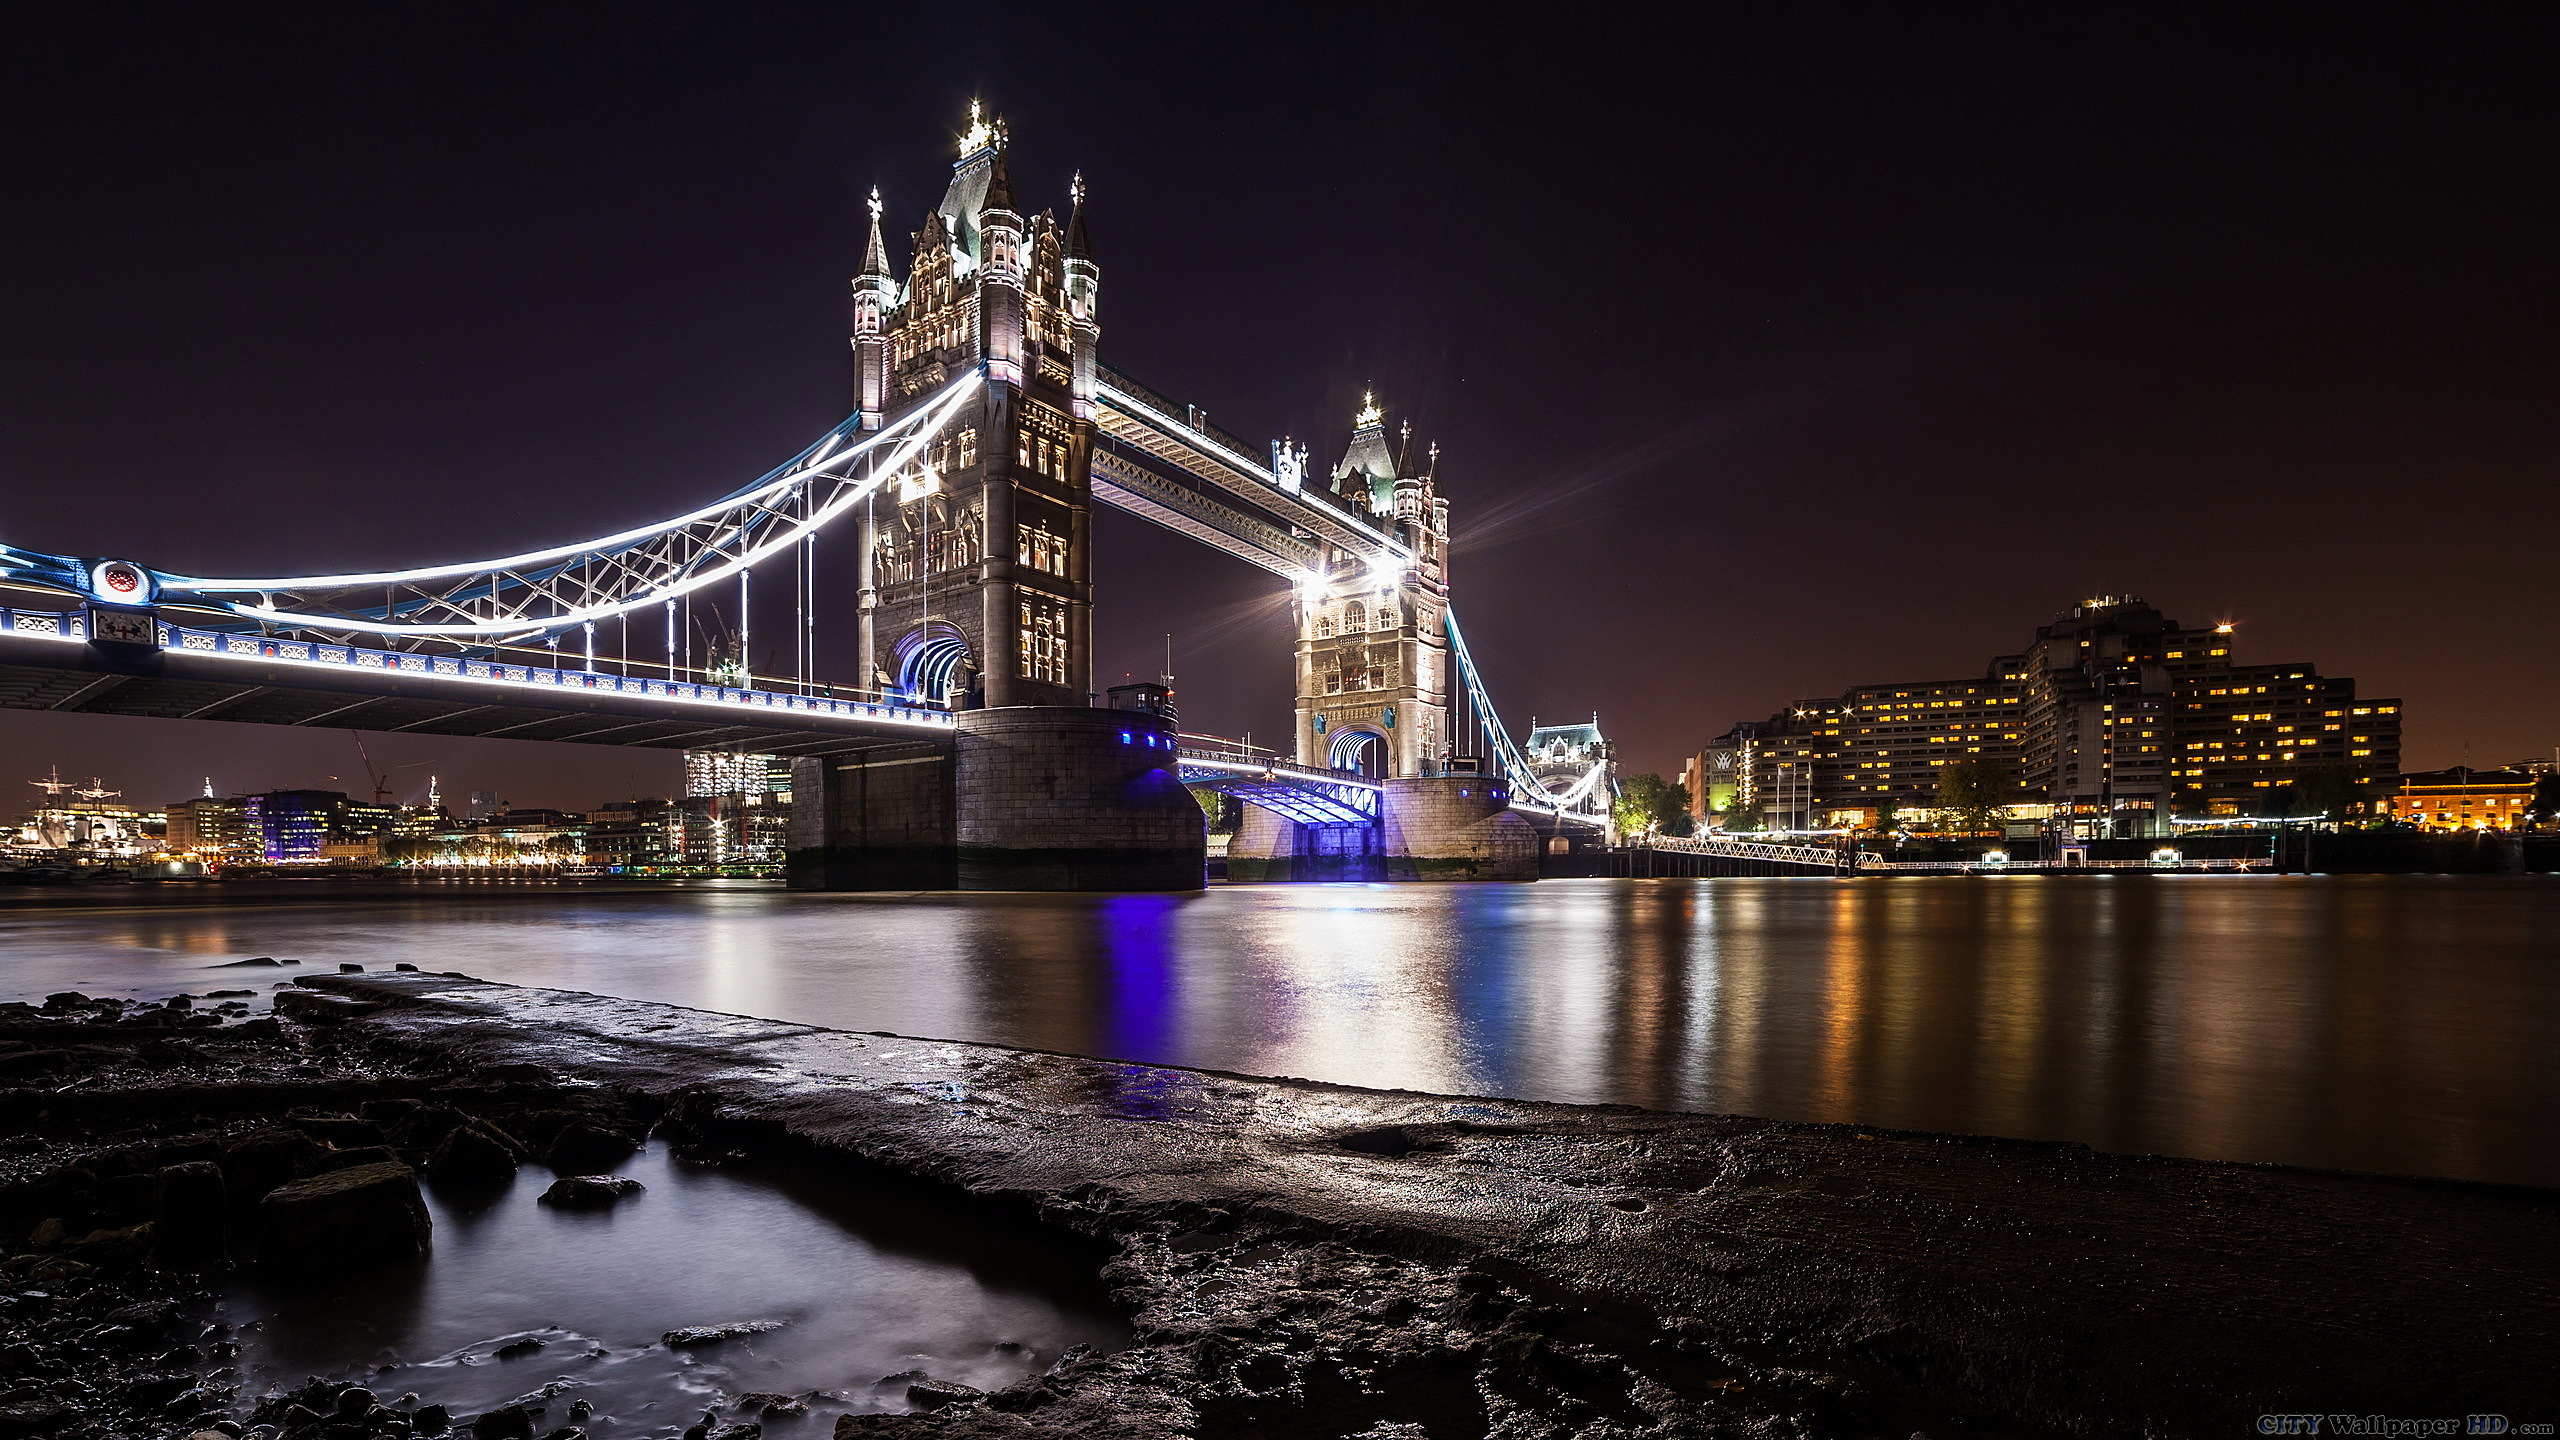 Classy shining tower bridge. Wide image of cities for a smartphone